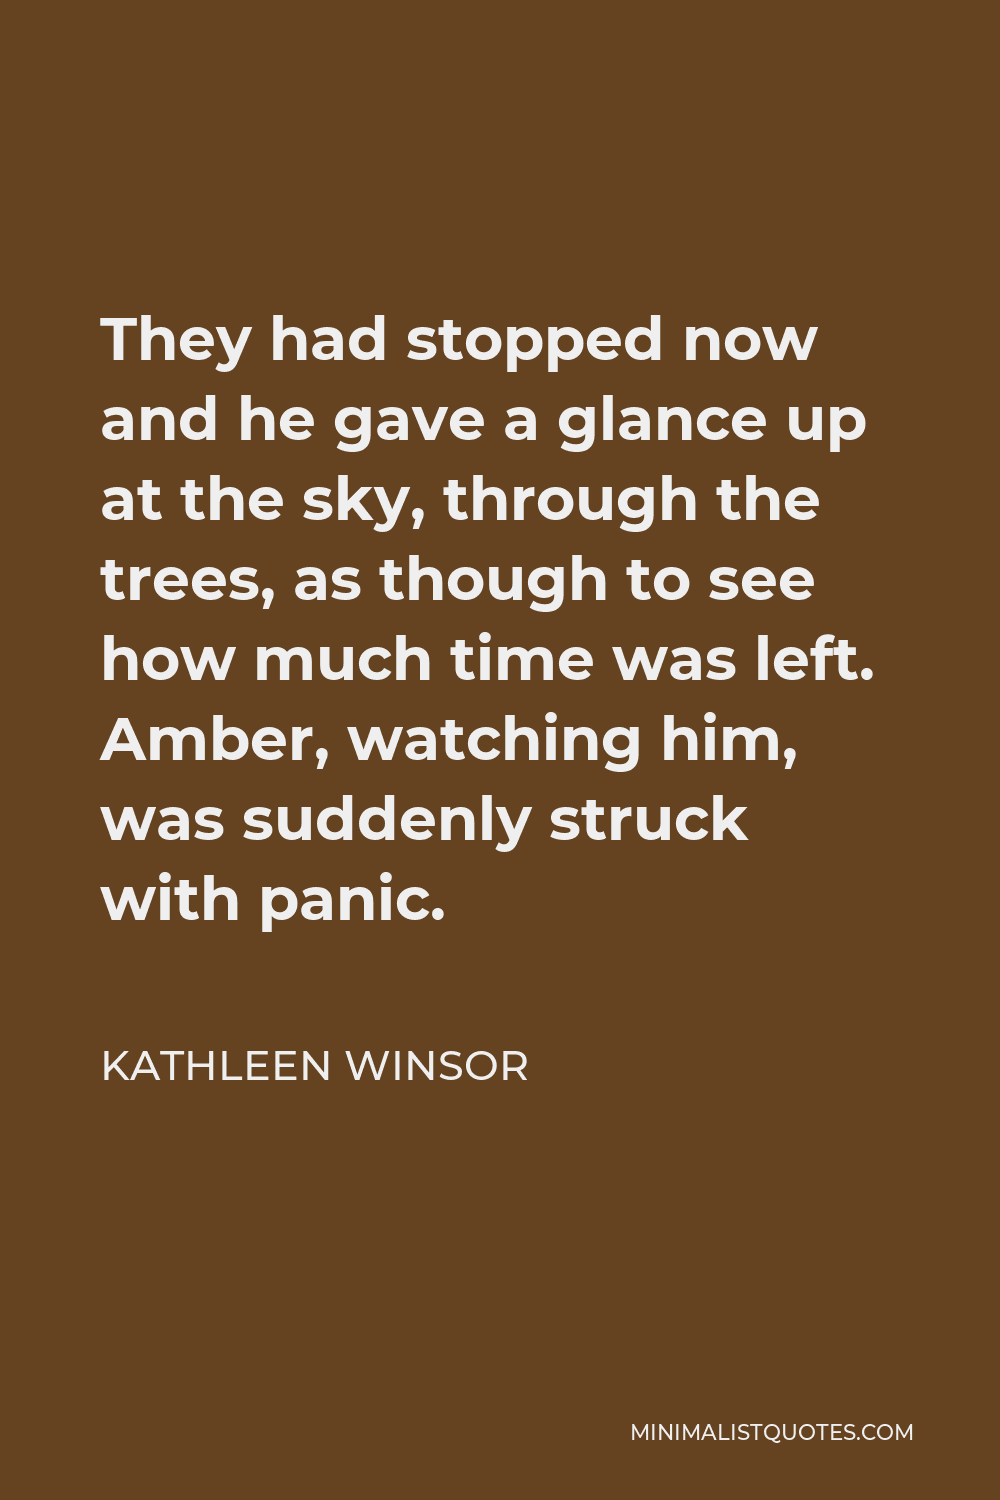 Kathleen Winsor Quote - They had stopped now and he gave a glance up at the sky, through the trees, as though to see how much time was left. Amber, watching him, was suddenly struck with panic.